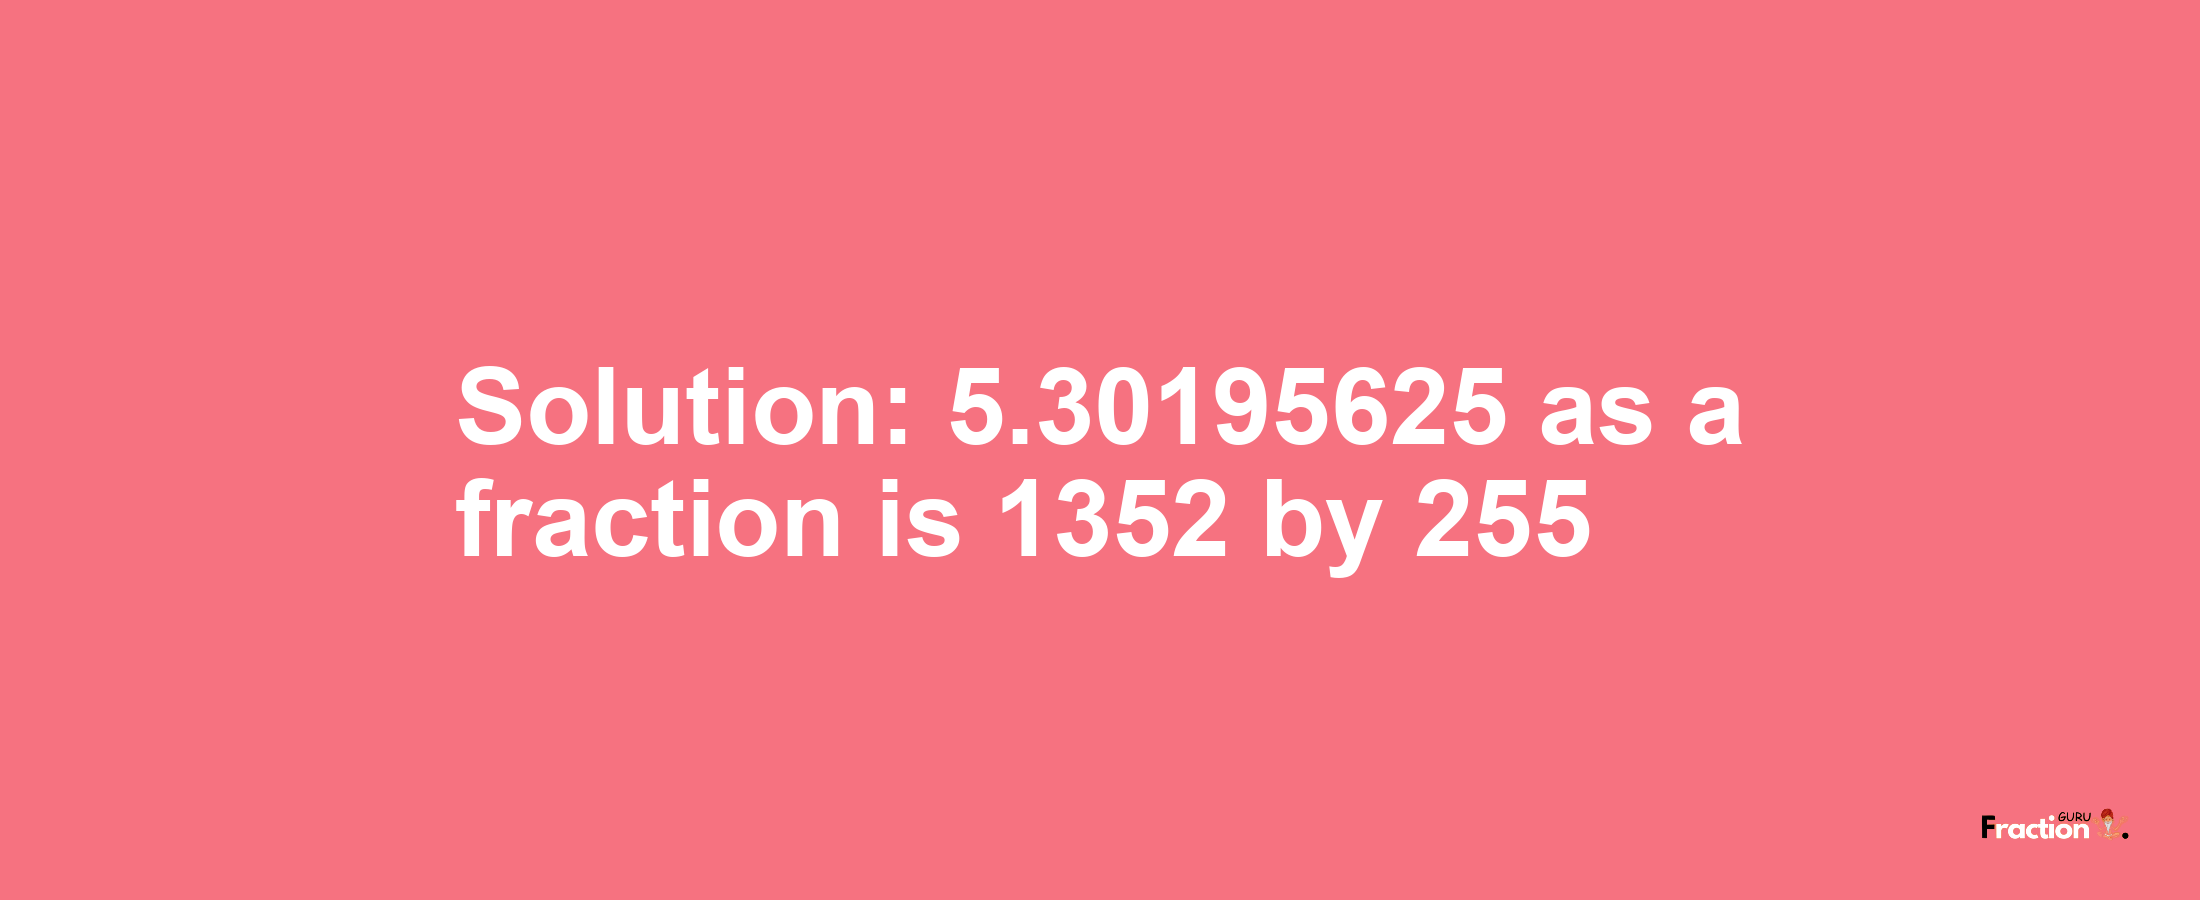 Solution:5.30195625 as a fraction is 1352/255